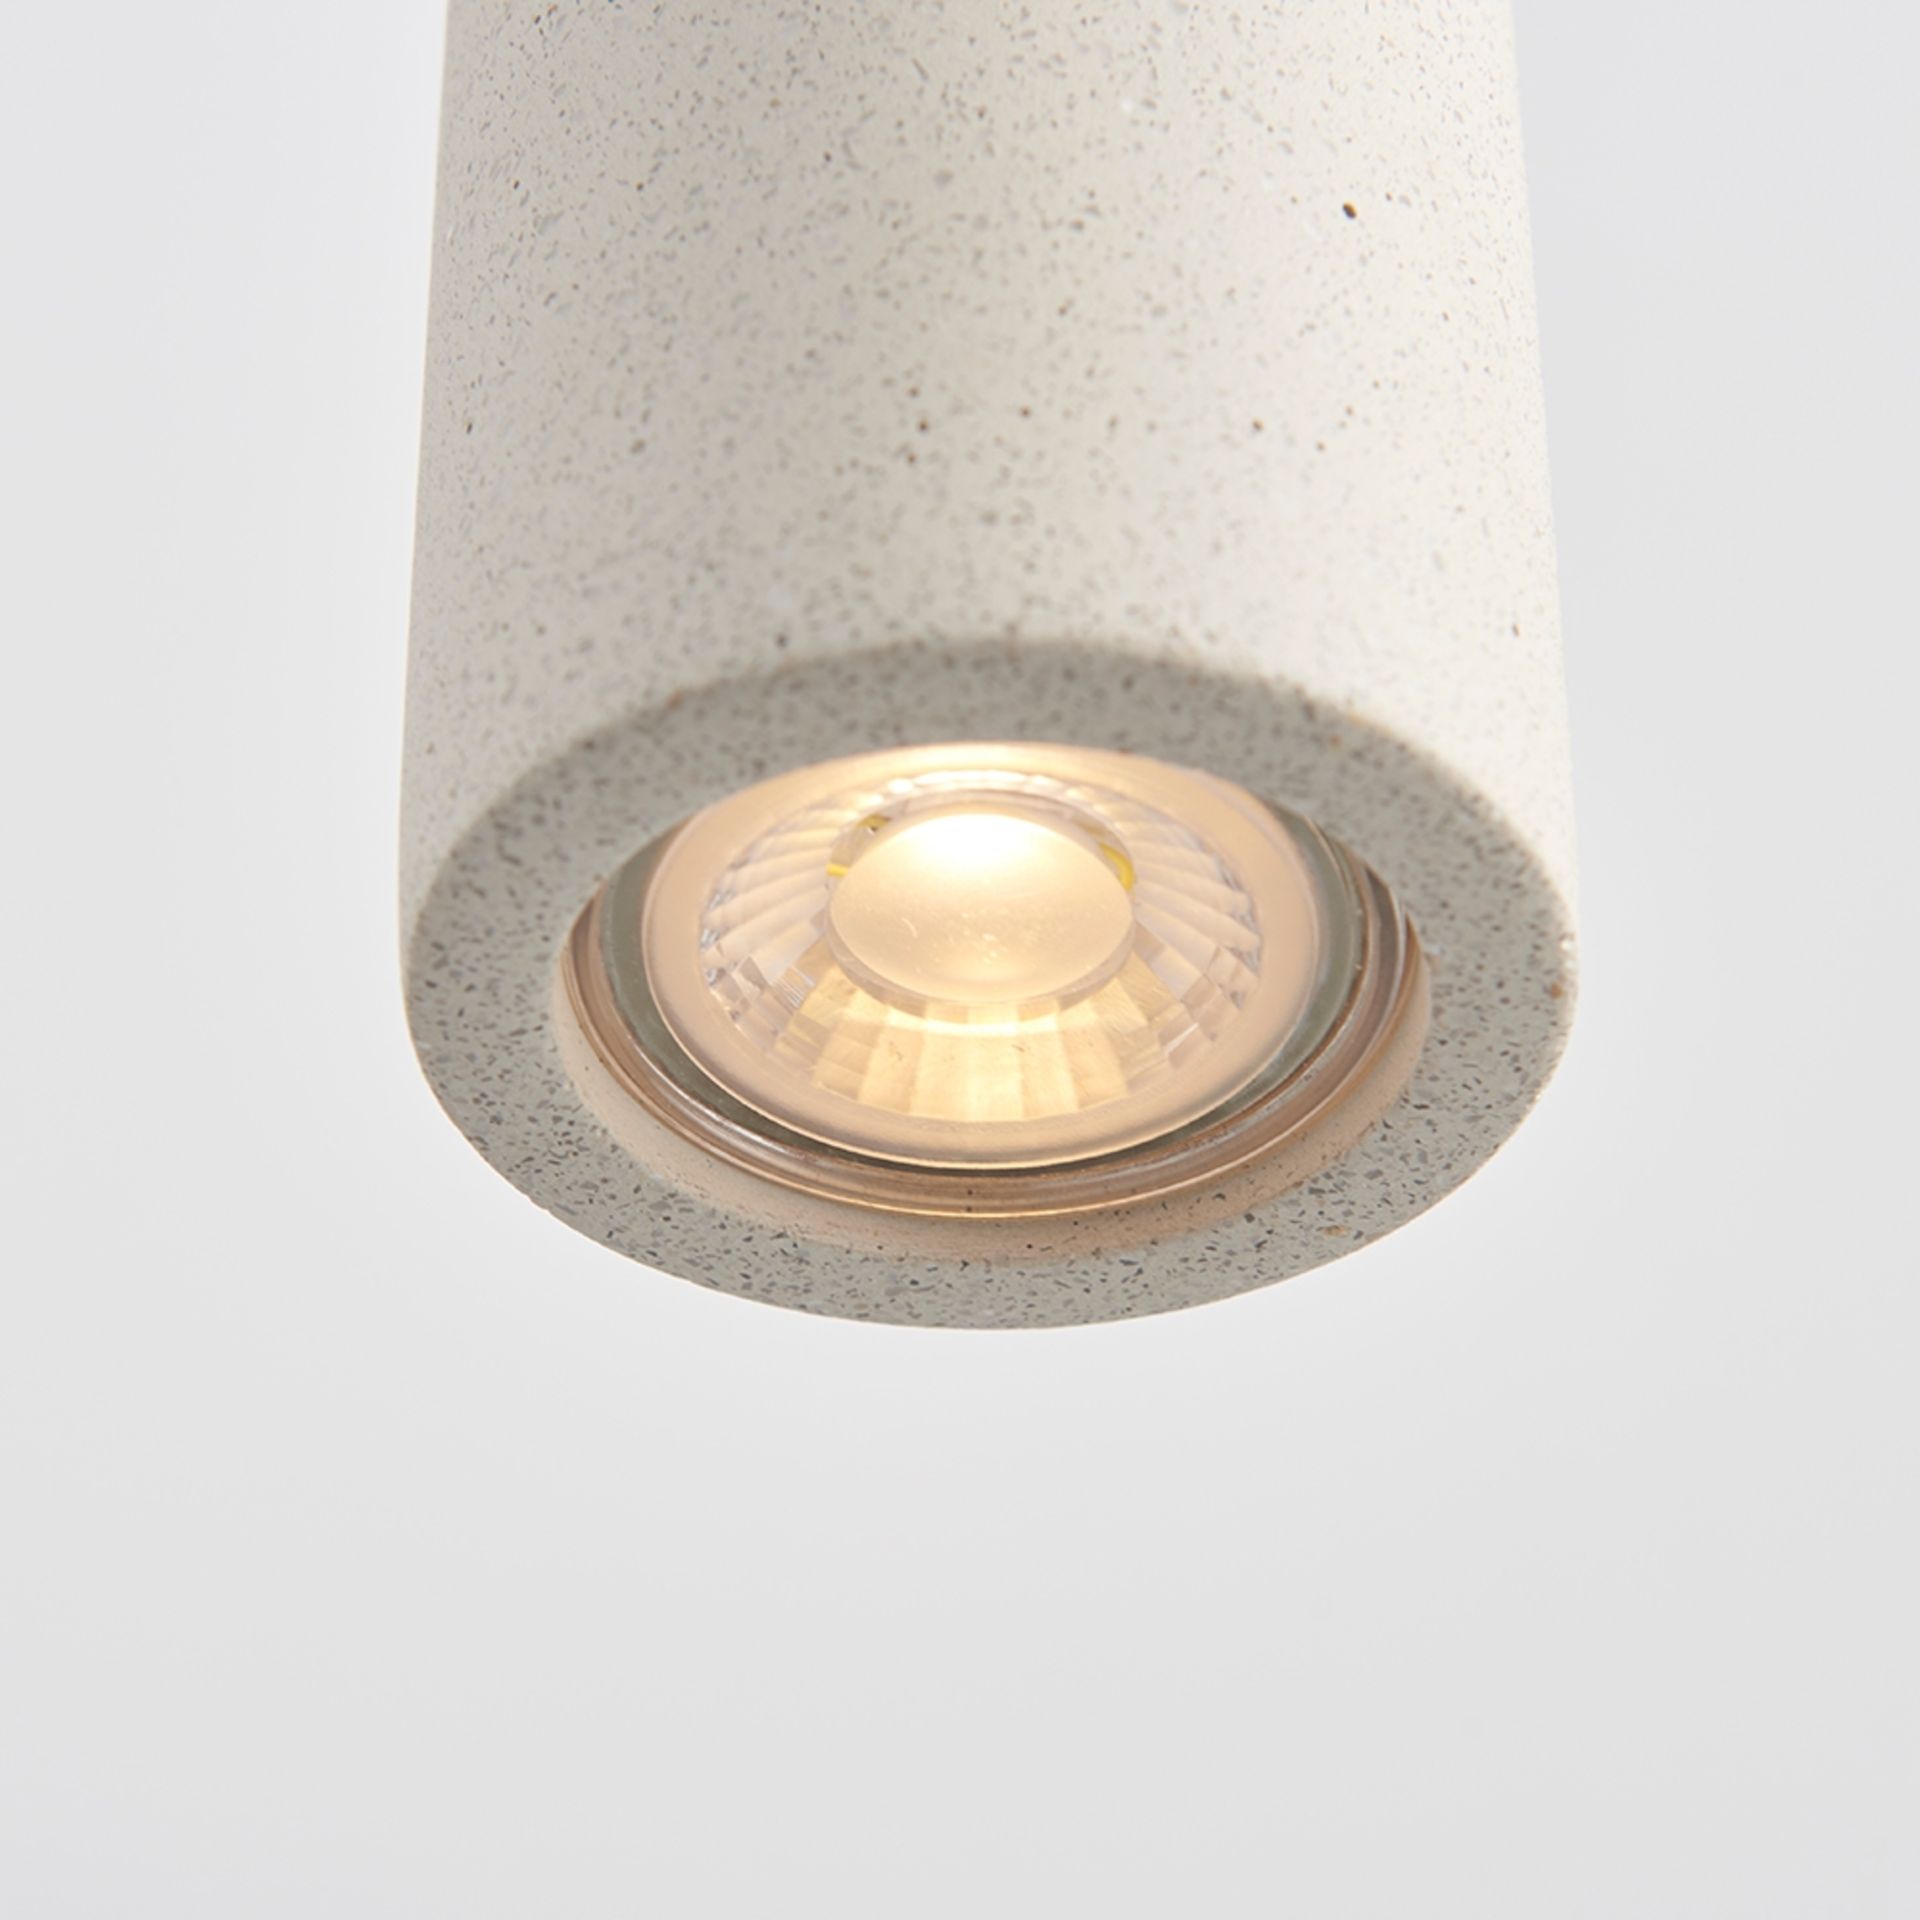 Endon Lighting Architectural inspired white sandstone concrete finish pendant, suspended from - Image 5 of 5